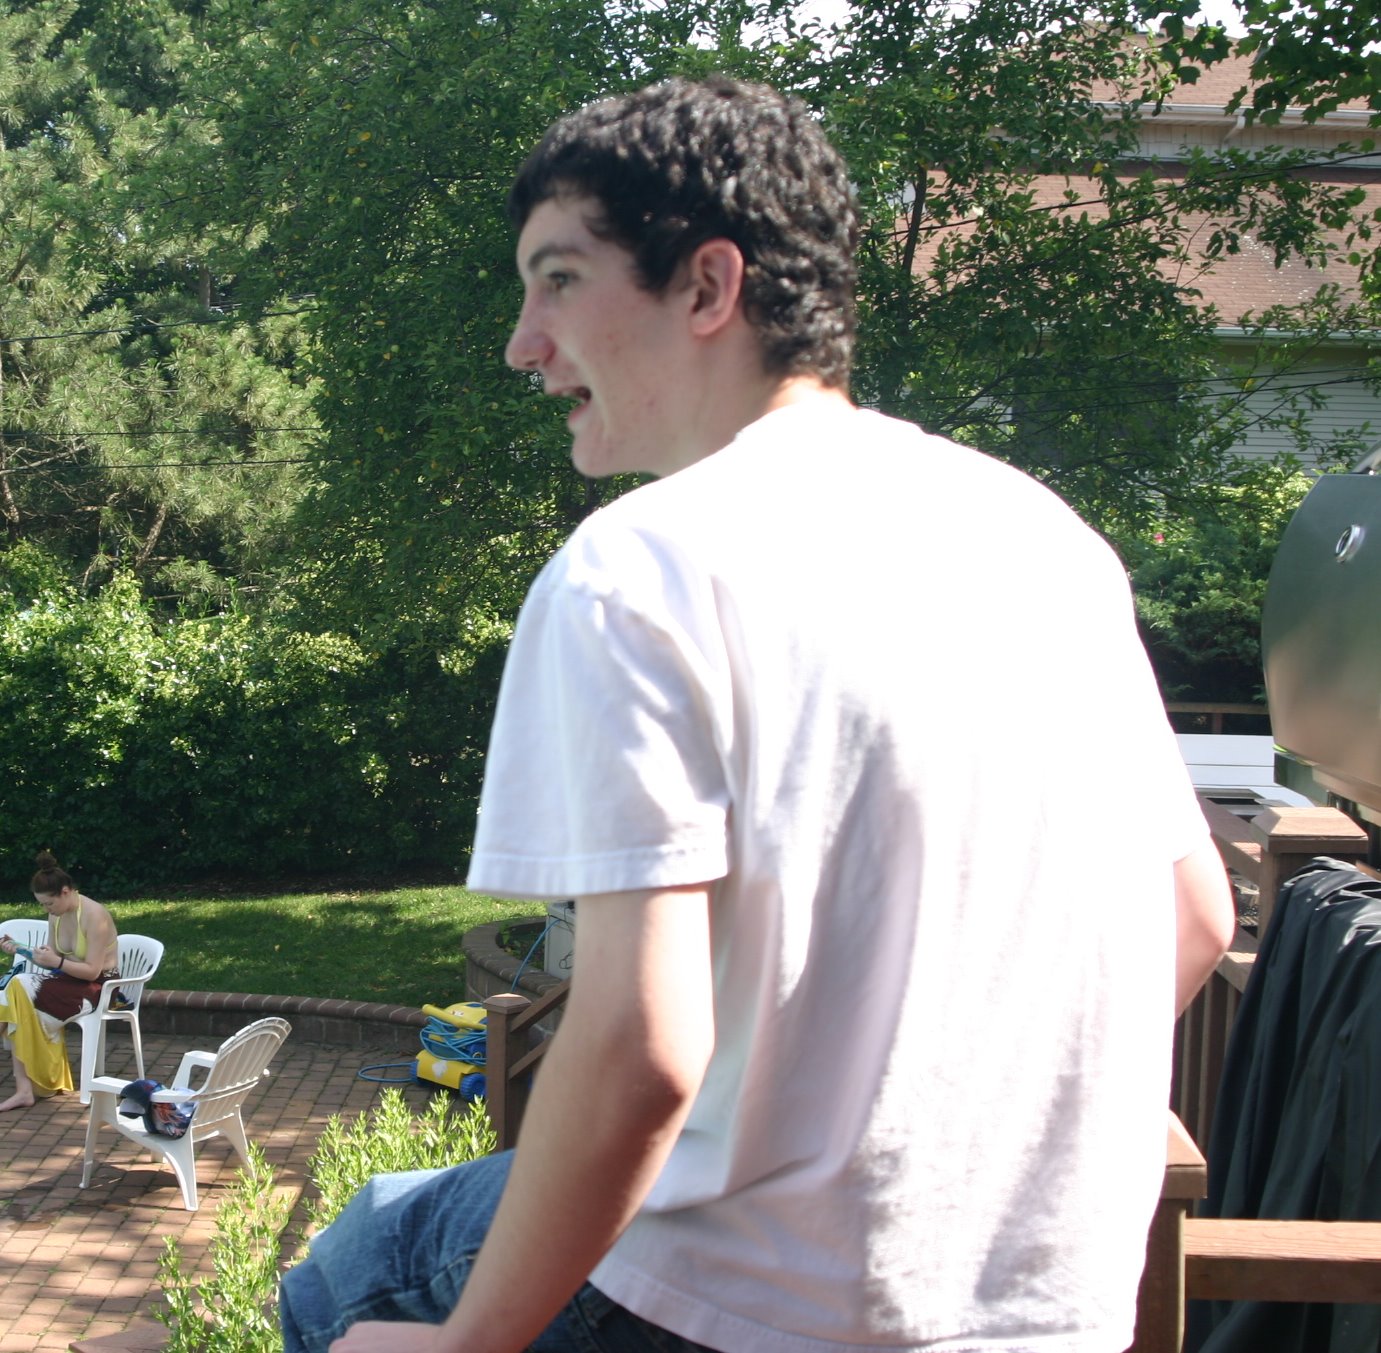 a young man in a white shirt standing in front of some people on the patio